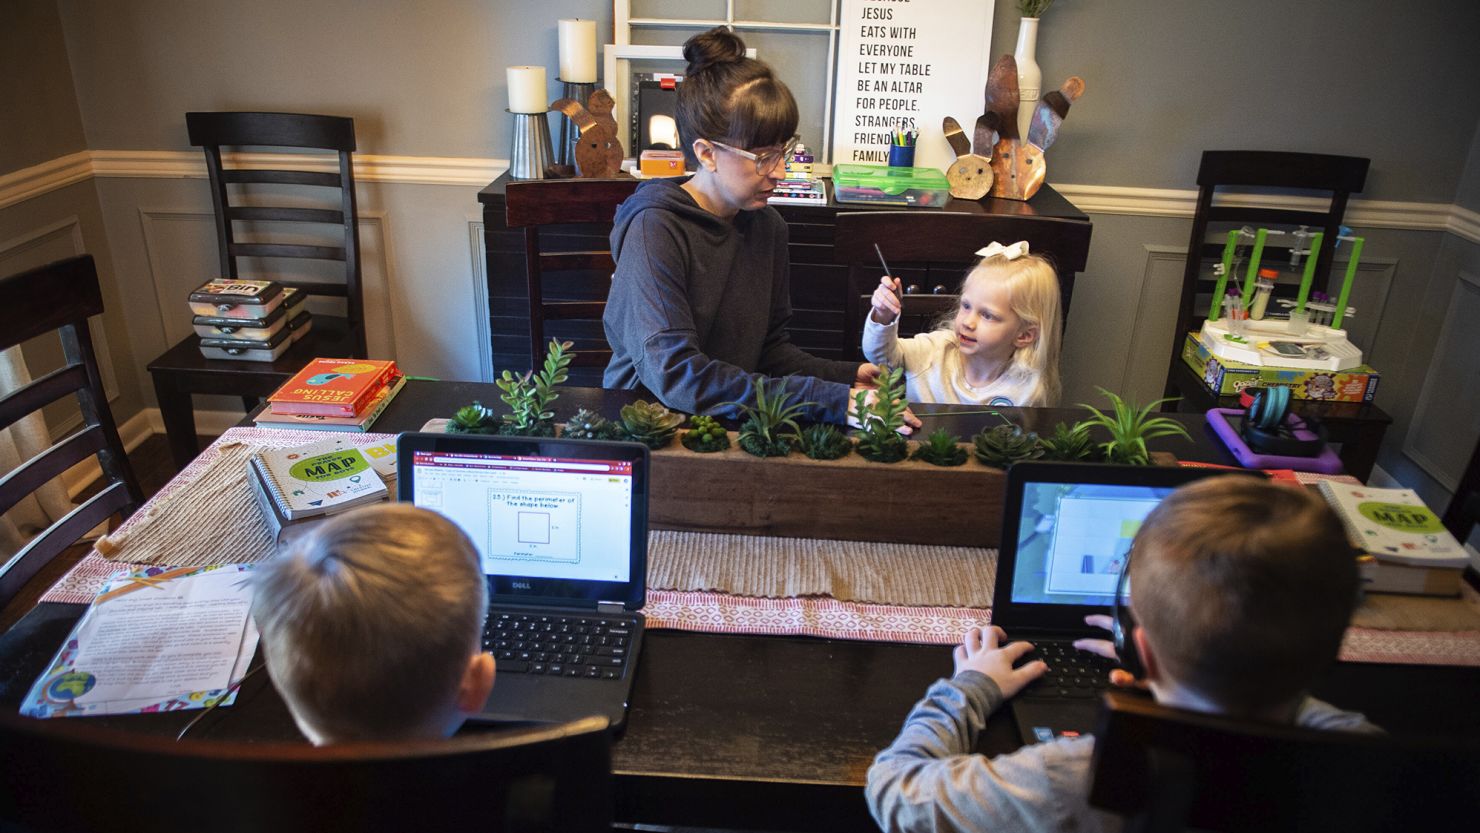 Austinville Elementary third grade teacher Emily Williams helps her daughter Lily, 3, as her two sons Braden, 10, bottom left, and Landen, 8, complete virtual school assignments in June at their home in Decatur, Alabama.